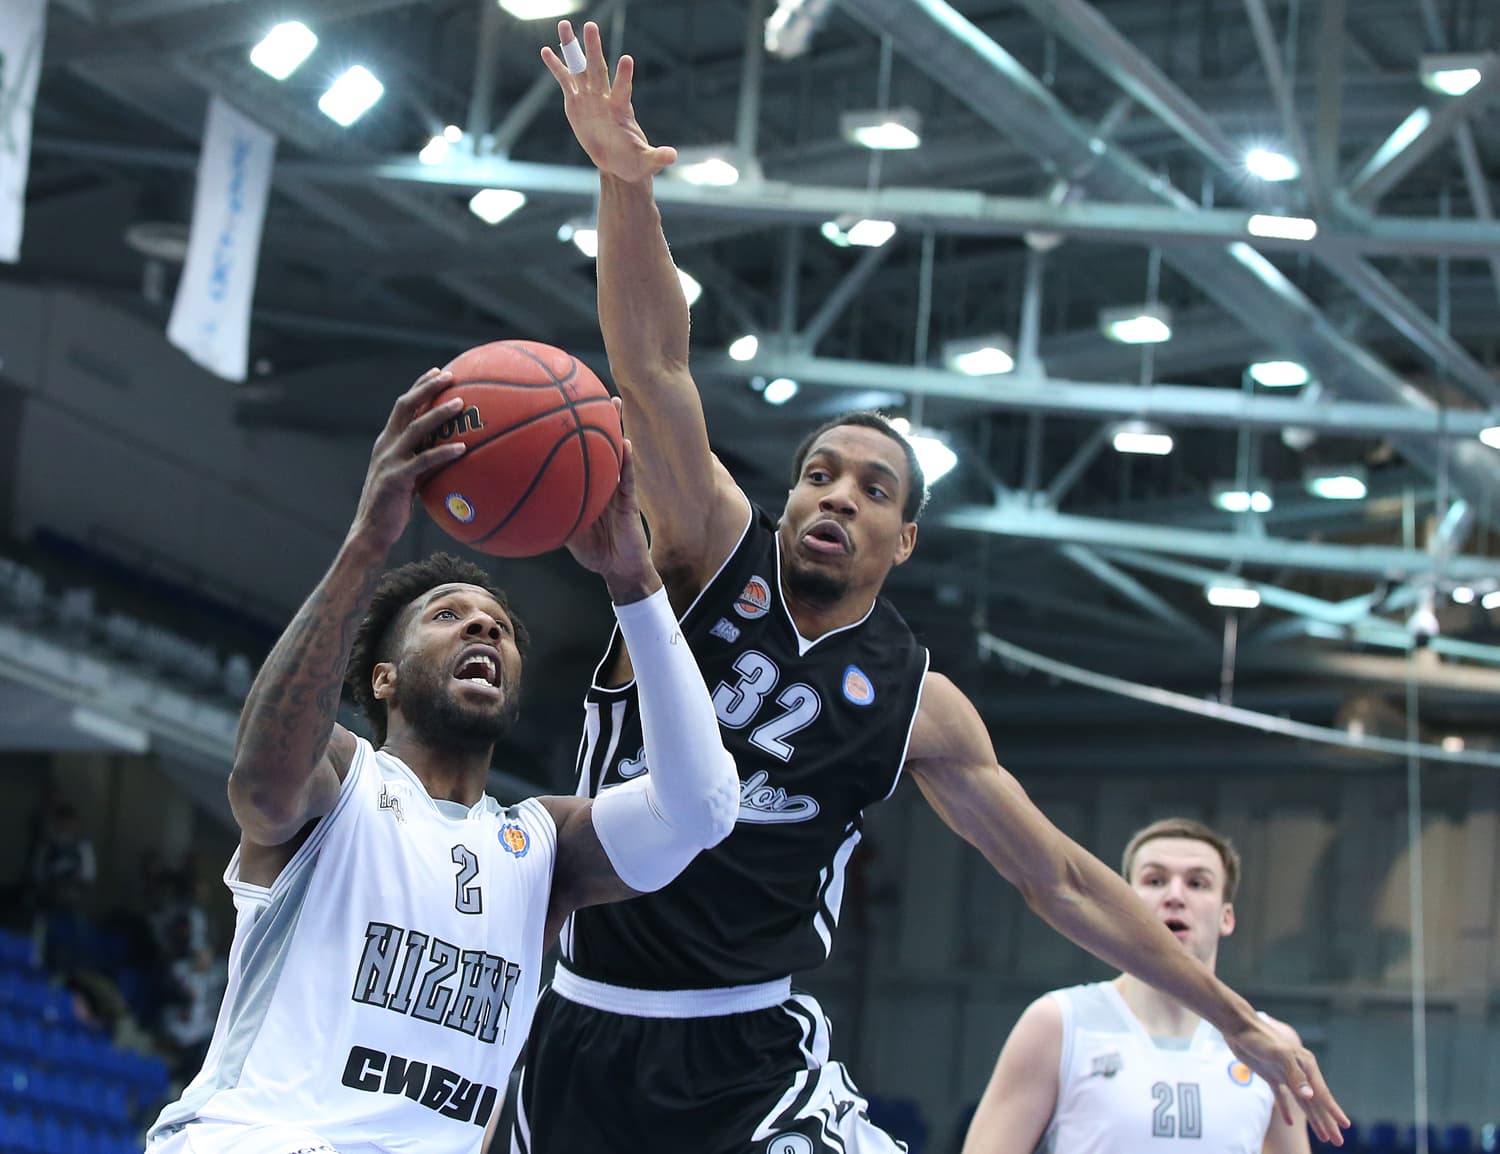 VTB League Aftermath: Battle For The Postseason Is Raging